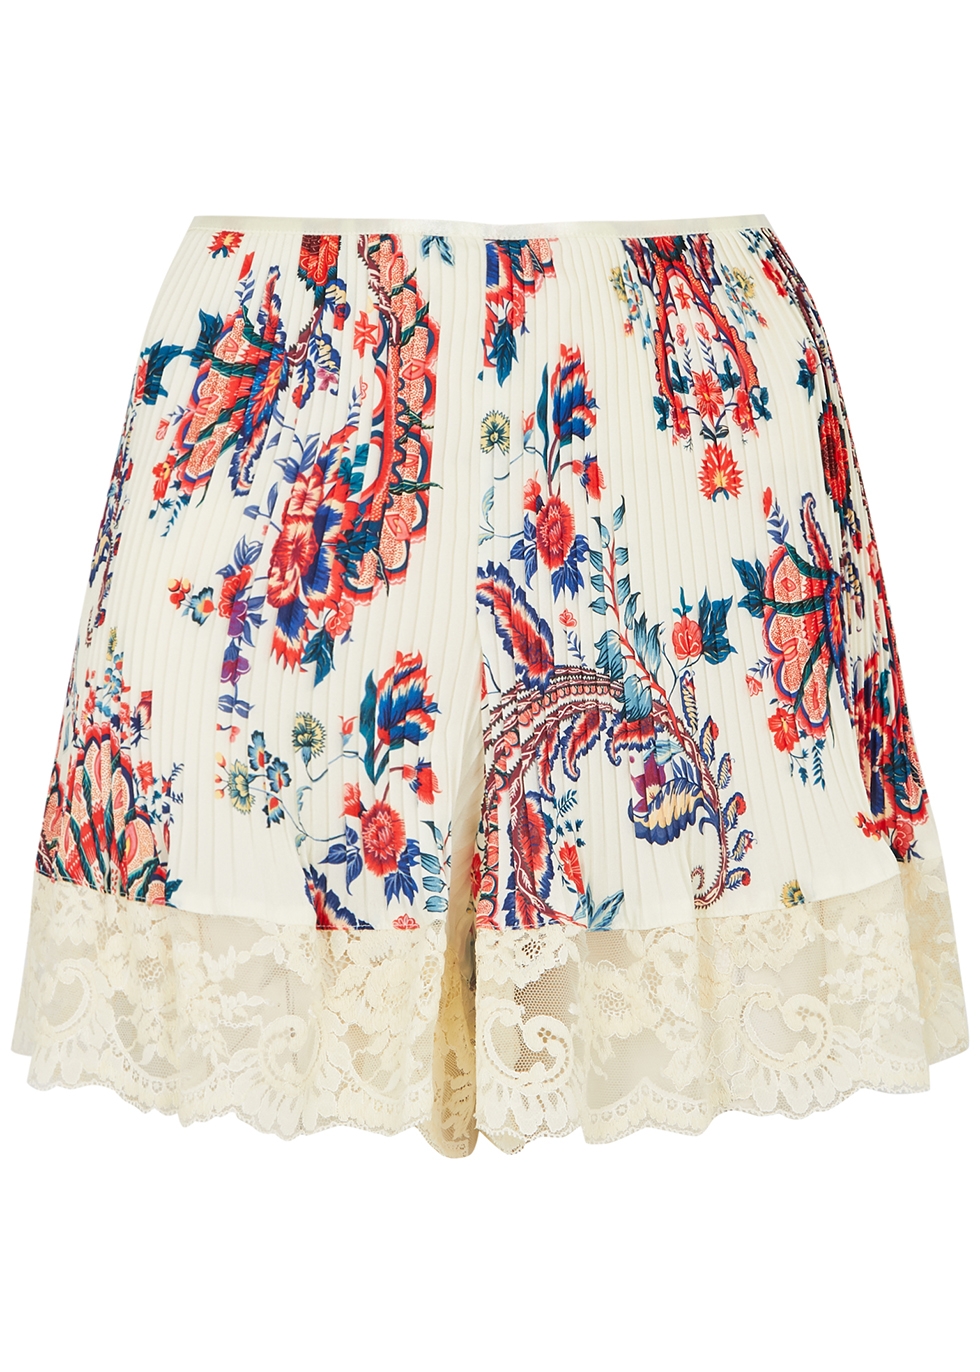 Paco Rabanne Printed lace-trimmed shorts - Harvey Nichols